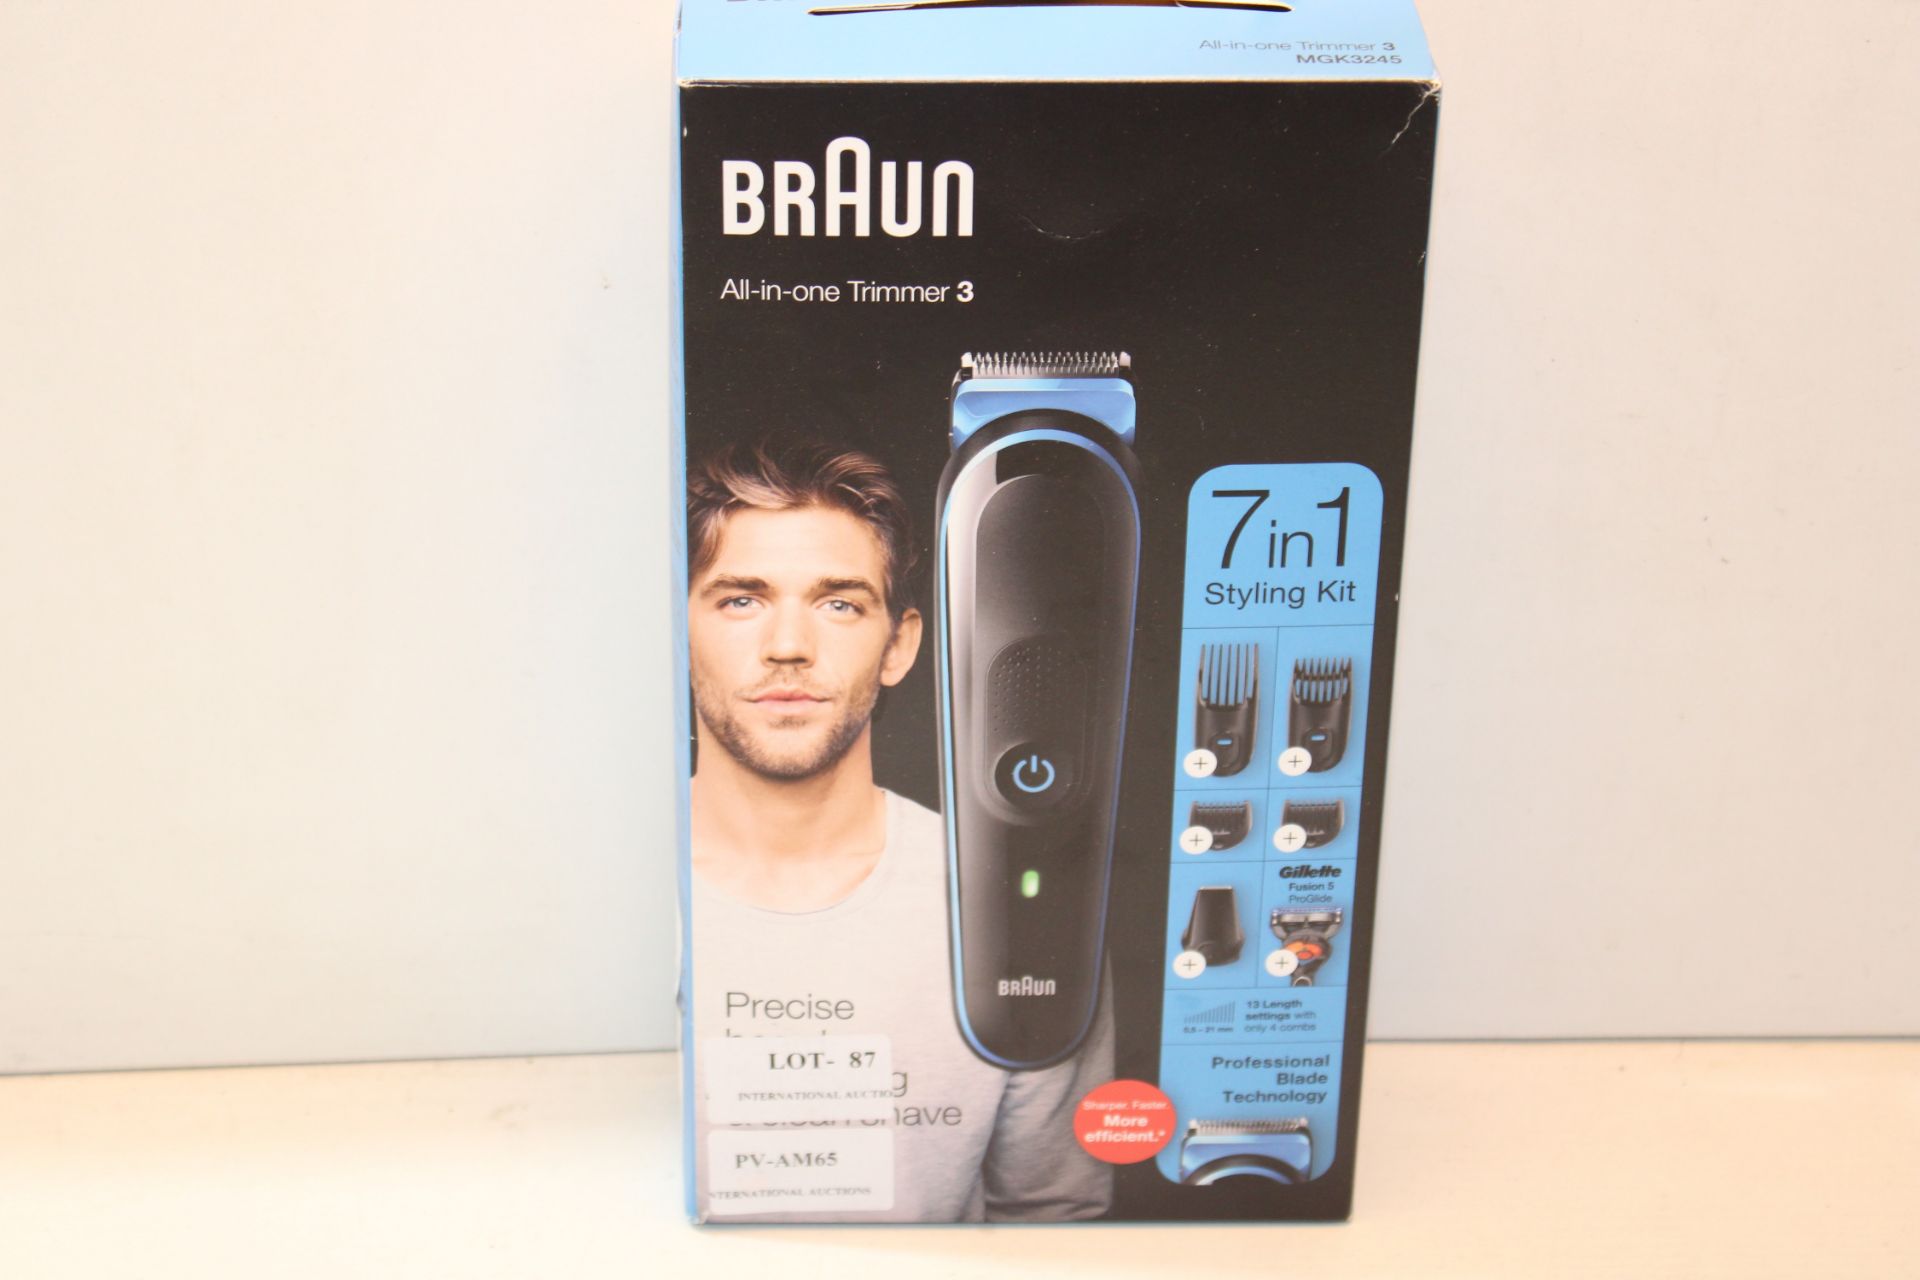 BOXED BRAUN ALL-IN-ONE TRIMMER 3 RRP £34.99Condition Report Appraisal Available on Request- All